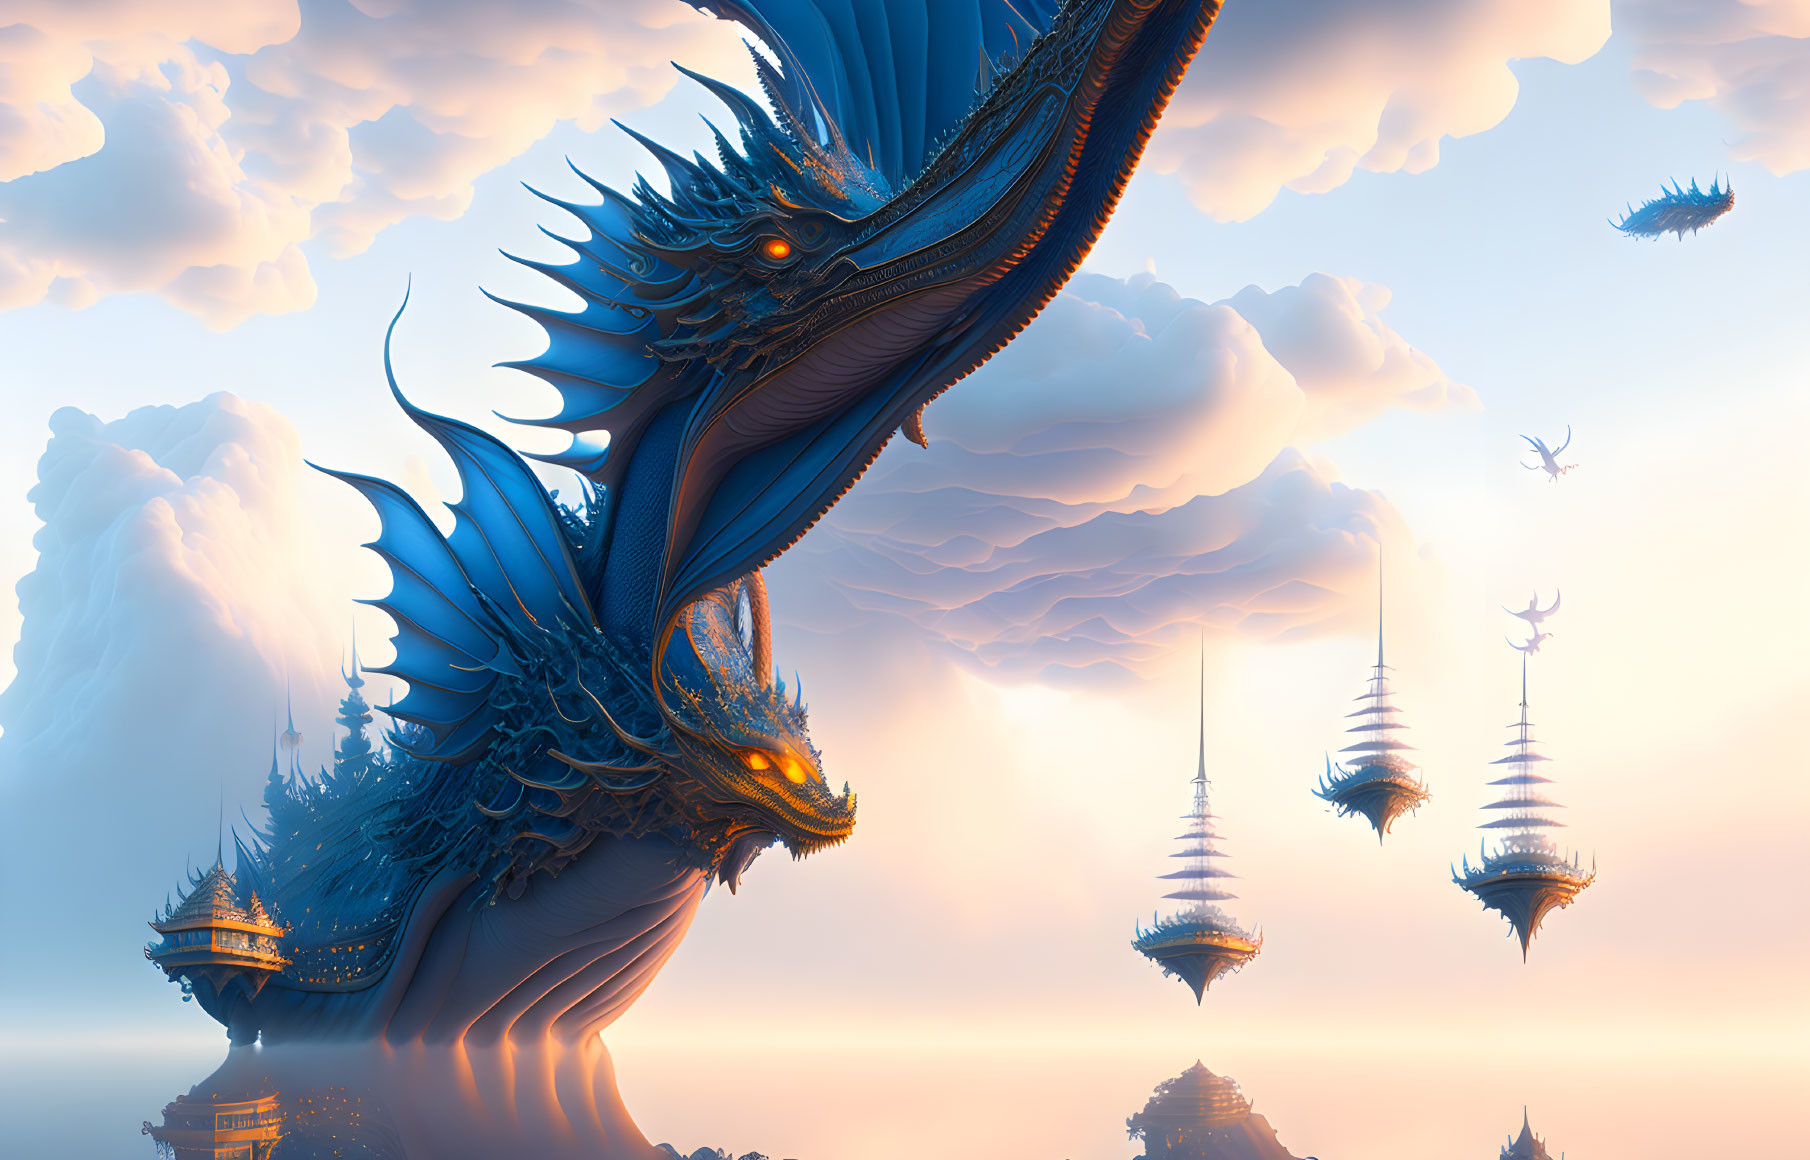 Blue dragon soaring over surreal sky with floating islands and structures